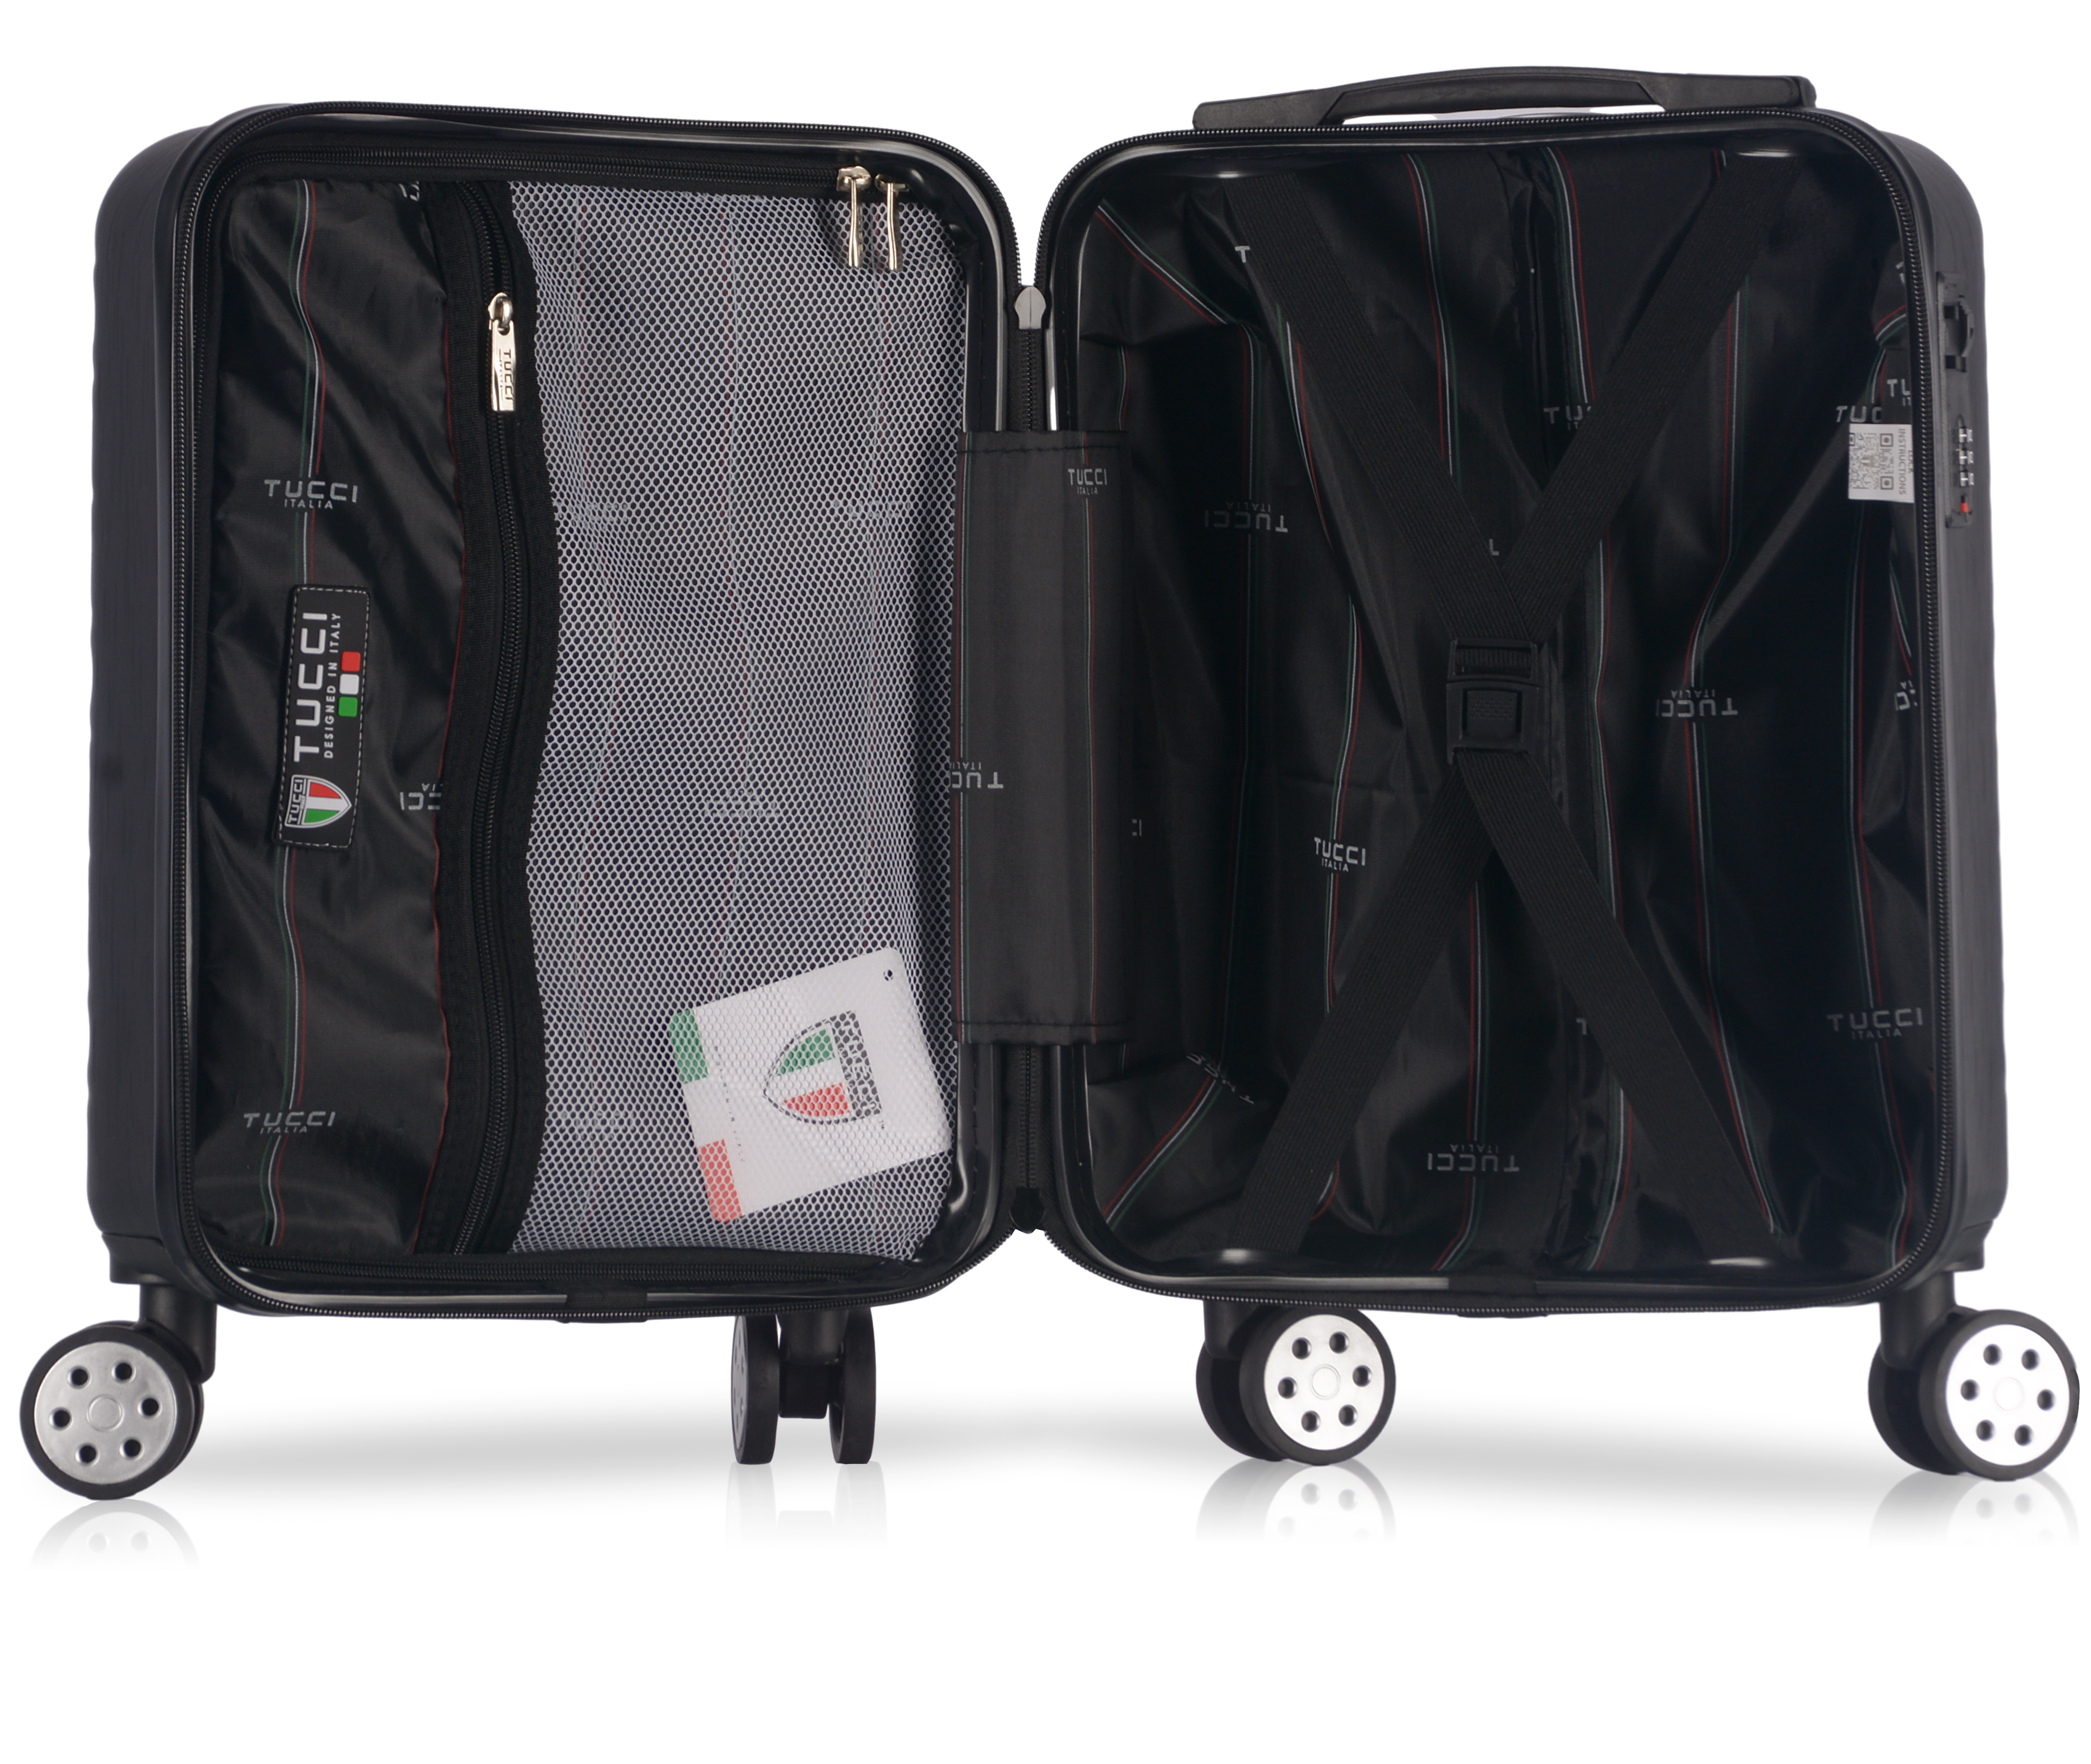 TUCCI Italy STORTA ABS 17" Carry On Luggage Suitcase